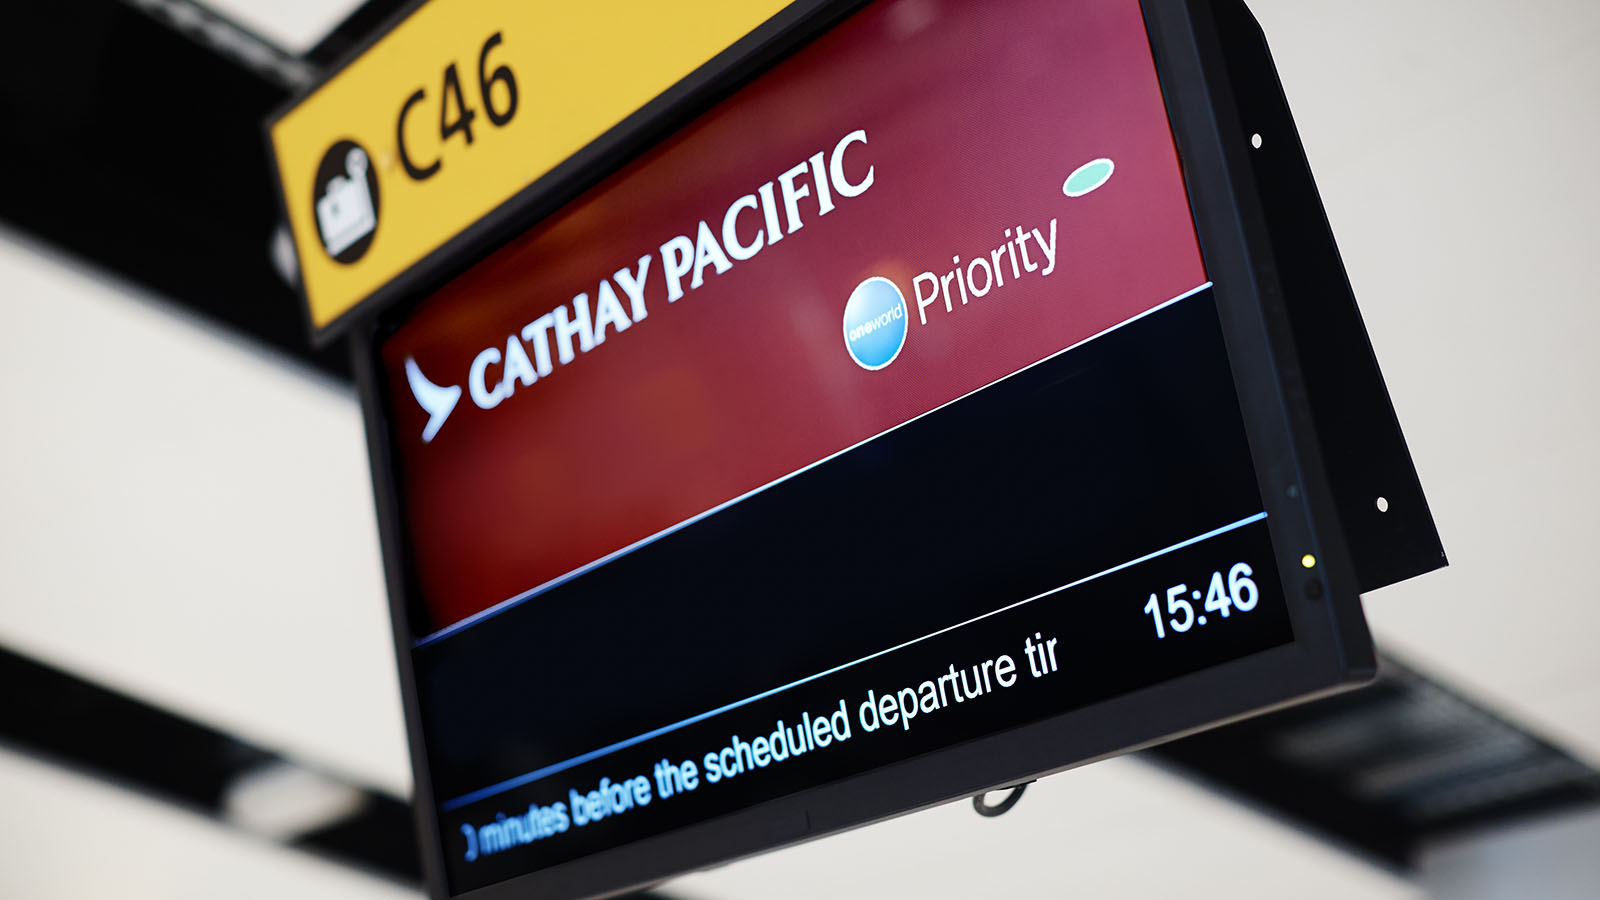 Cathay Pacific First Class check-in at London Heathrow